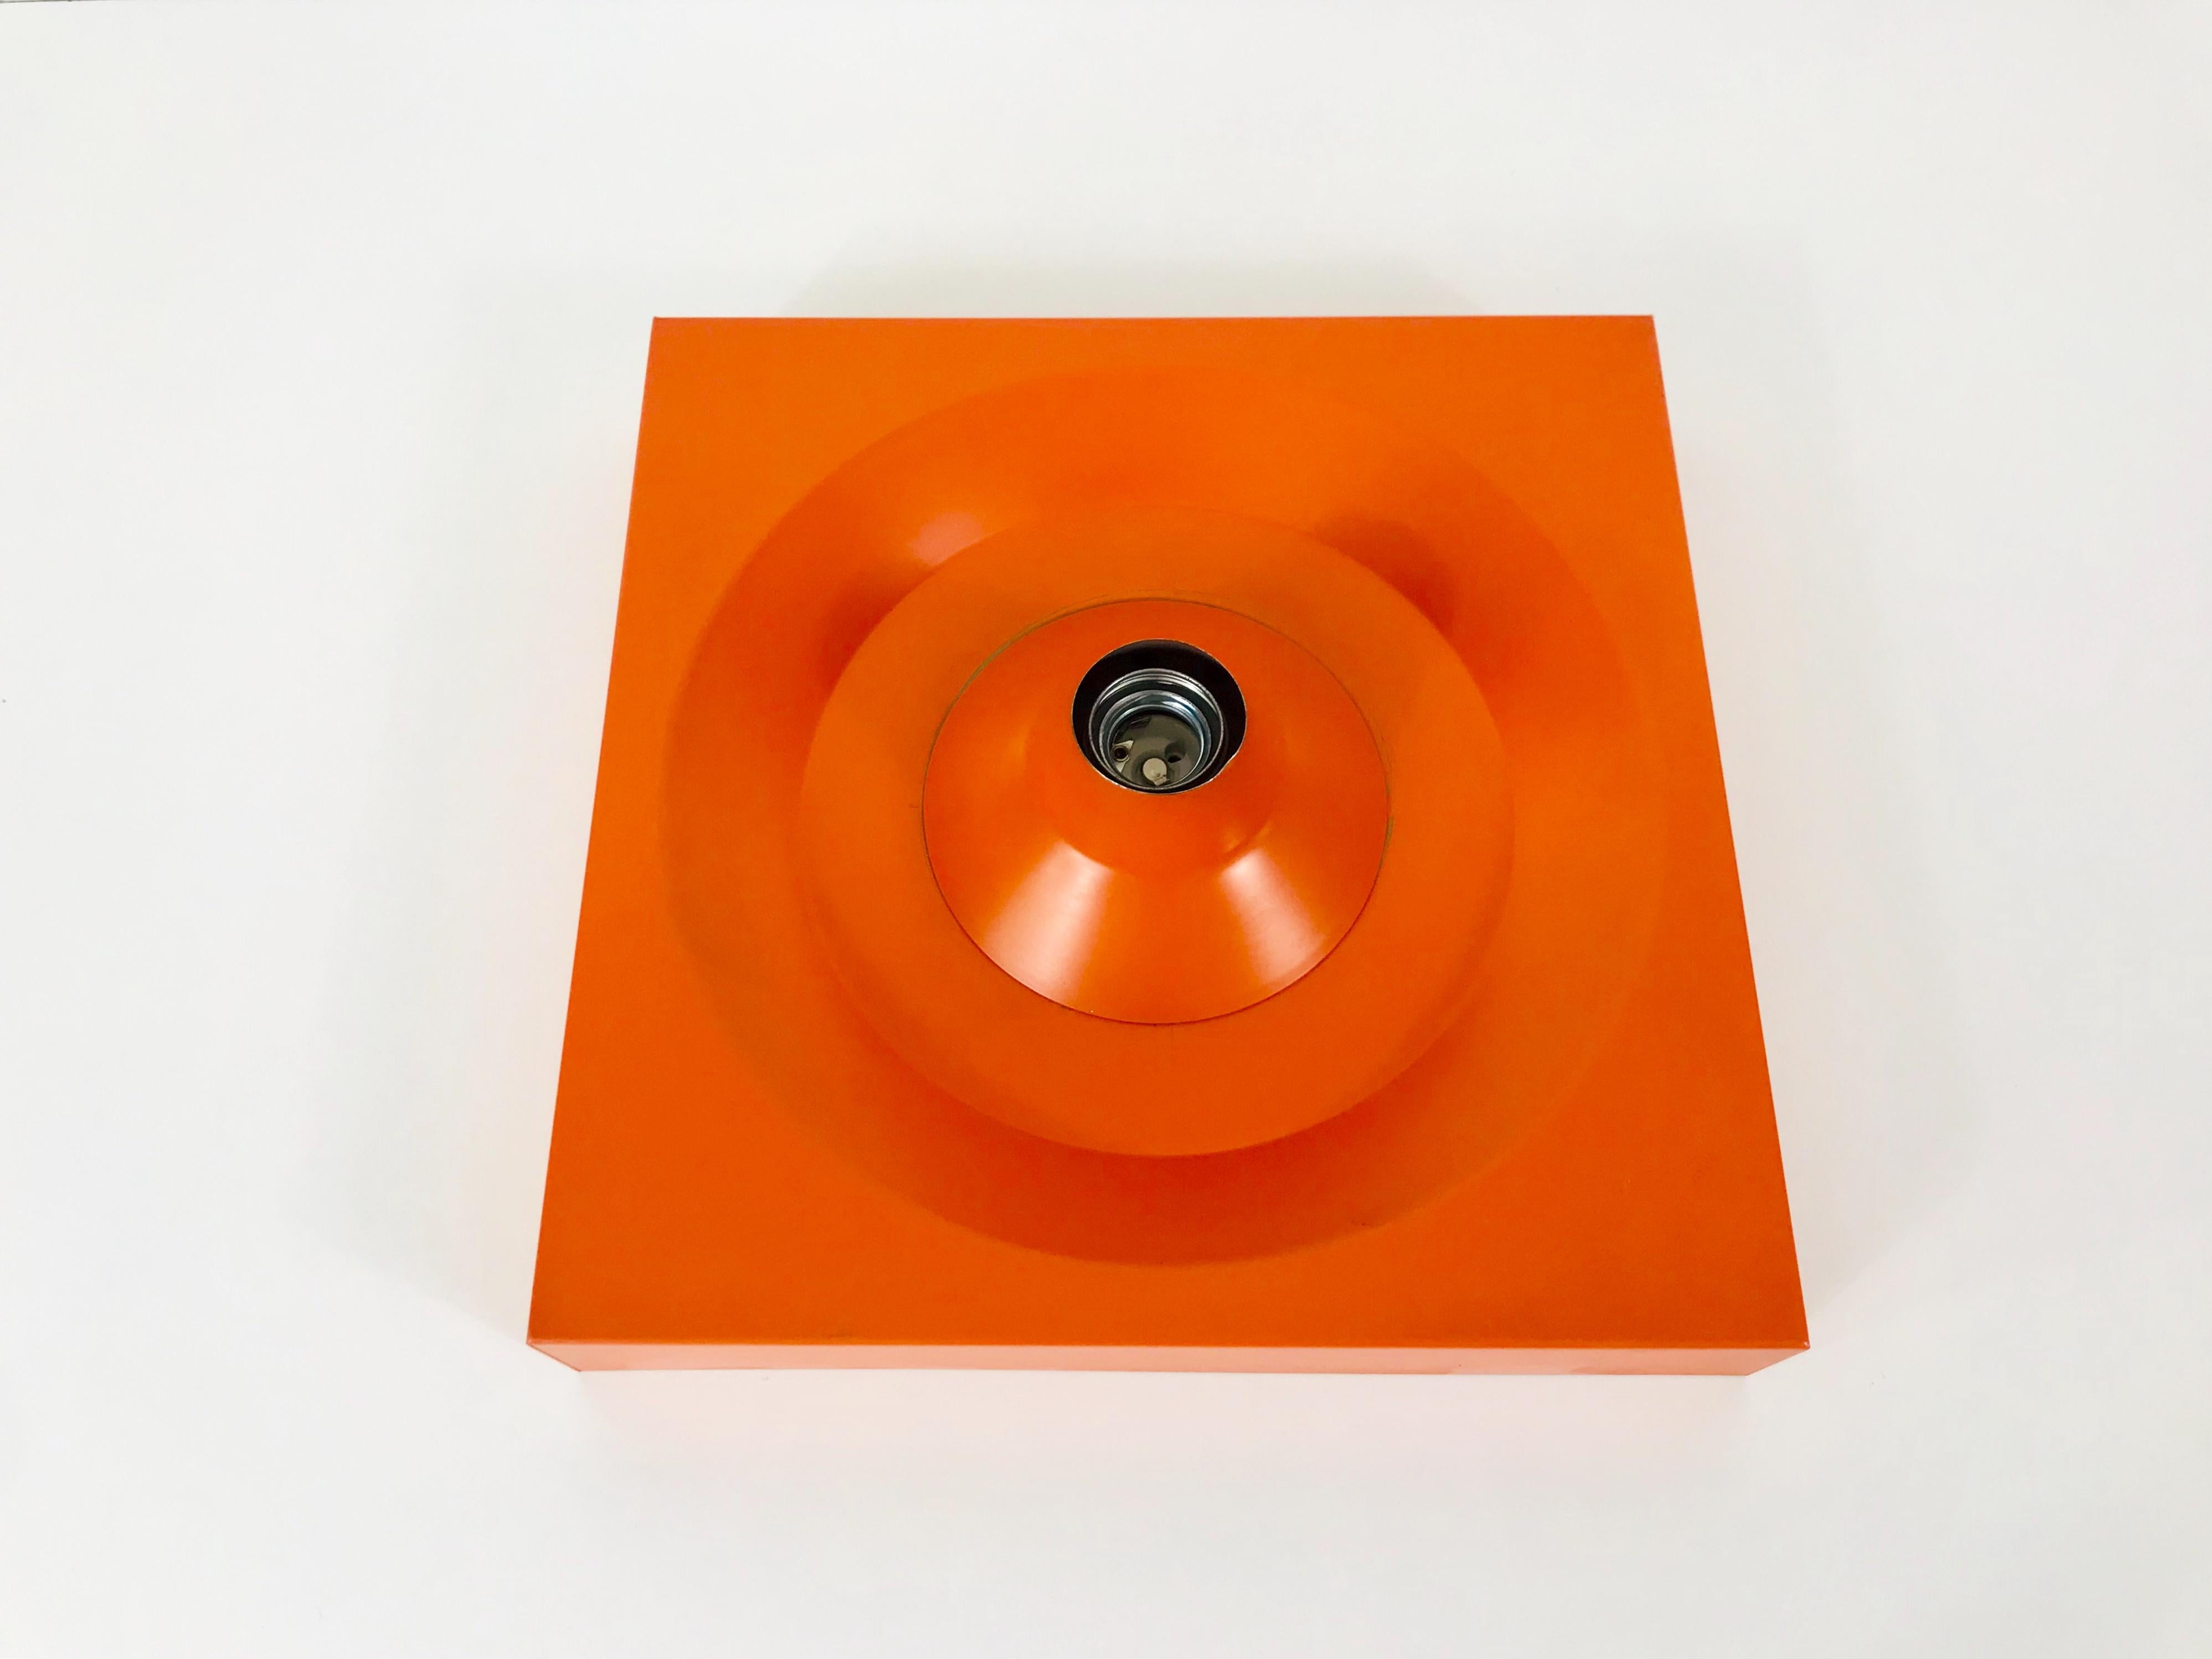 A Space Age flush mount or wall lamp by Kaiser made in Germany in the 1970s. It was designed by Klaus Hempel. The body of the lamp is made of full metal and has a beautiful orange color. 

Measurements:

Height 5 cm

Diameter 31 cm

The